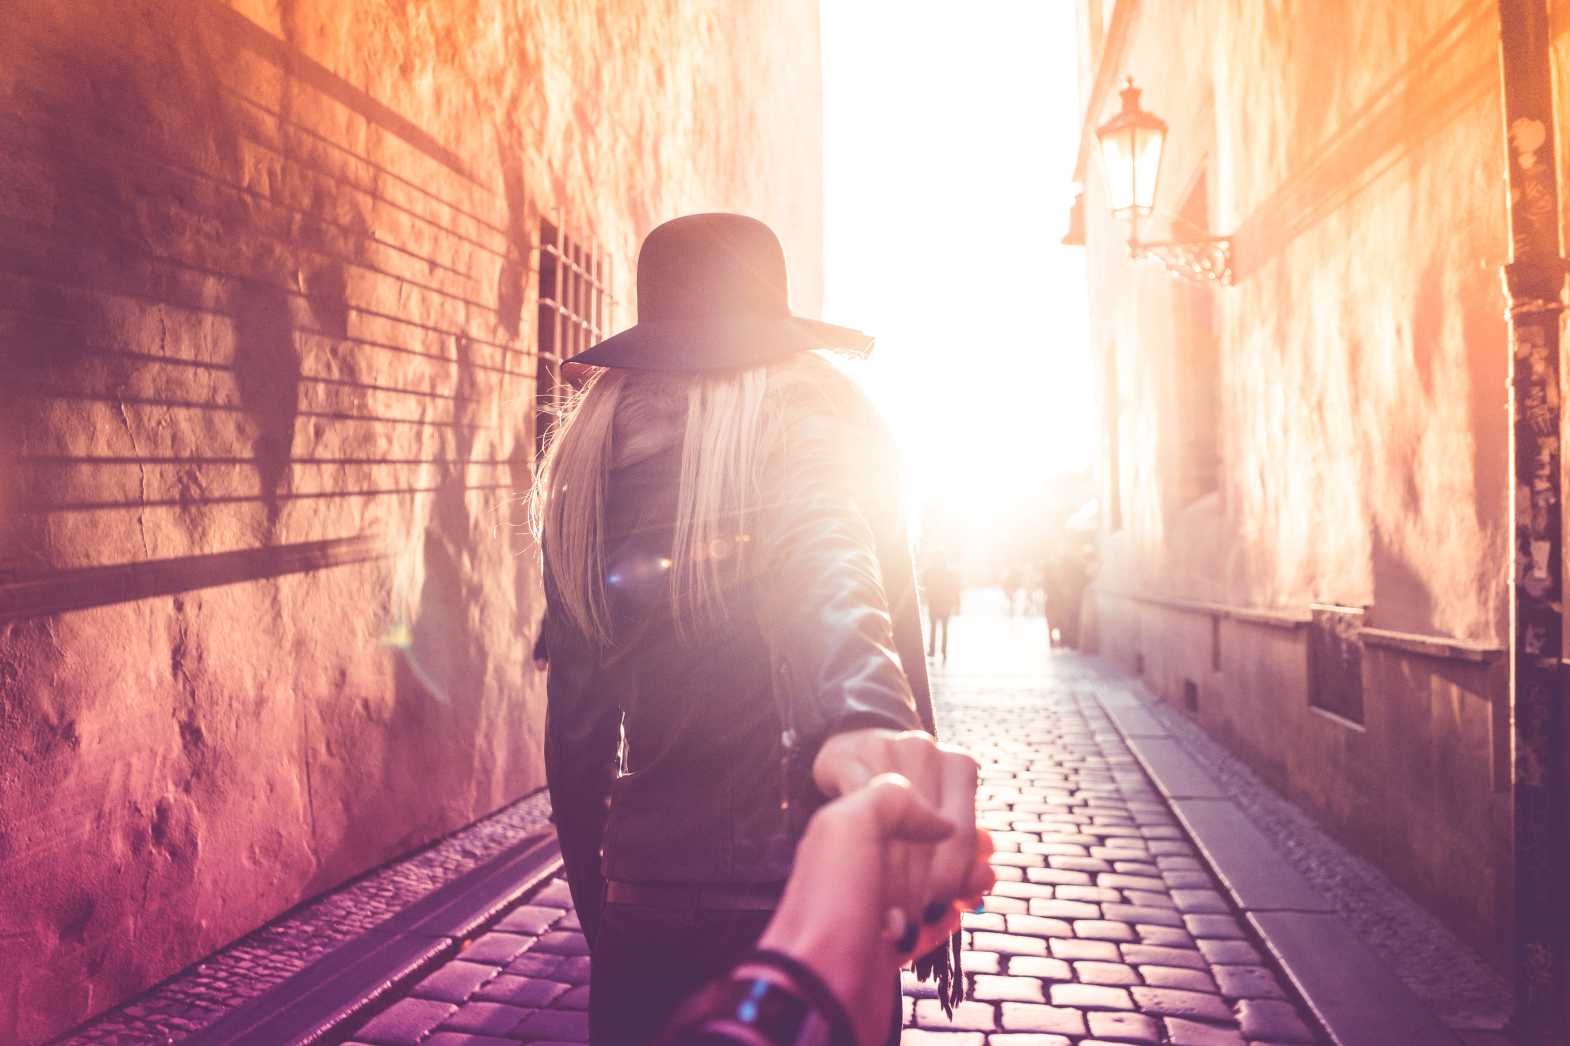 Free stock photo of Young Woman Presents Follow Me To Pose in Prague Streets from picjumbo.com